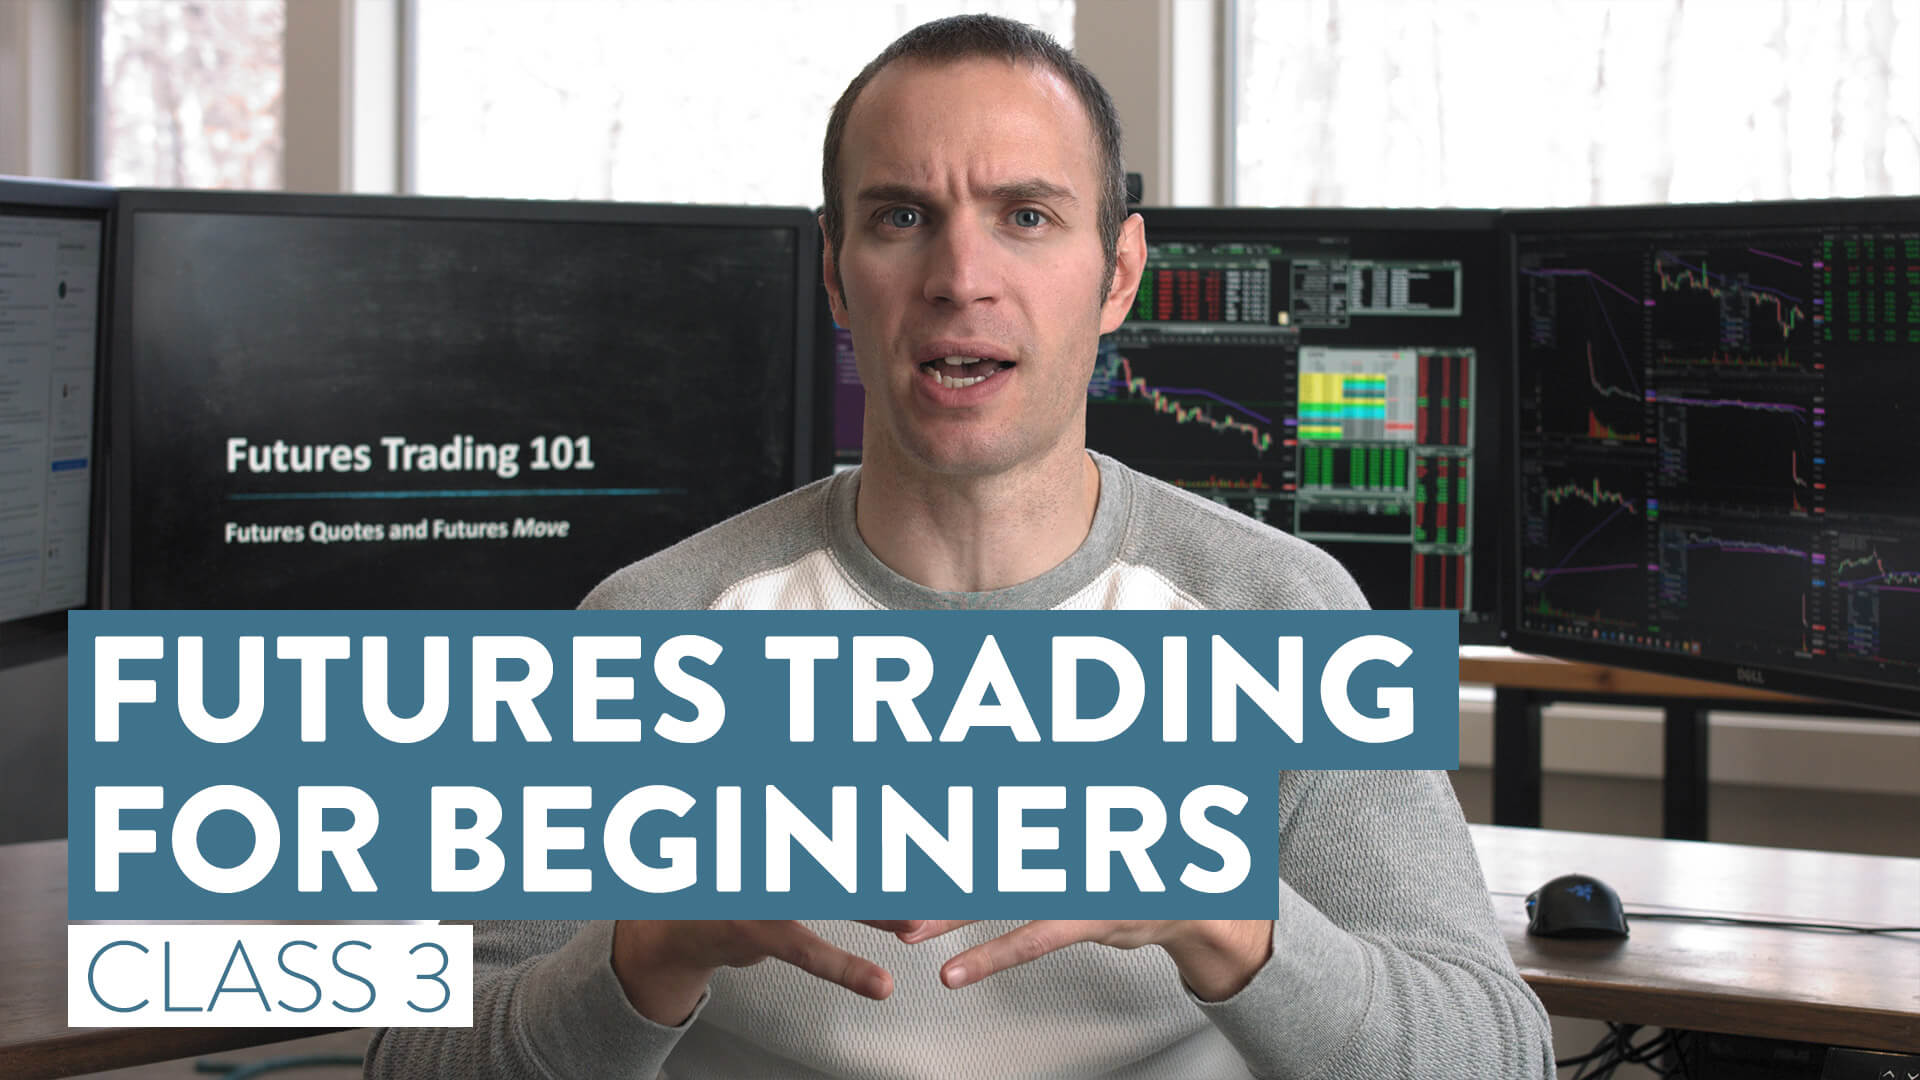 How To Trade Futures For Beginners The Basics of Futures Trading